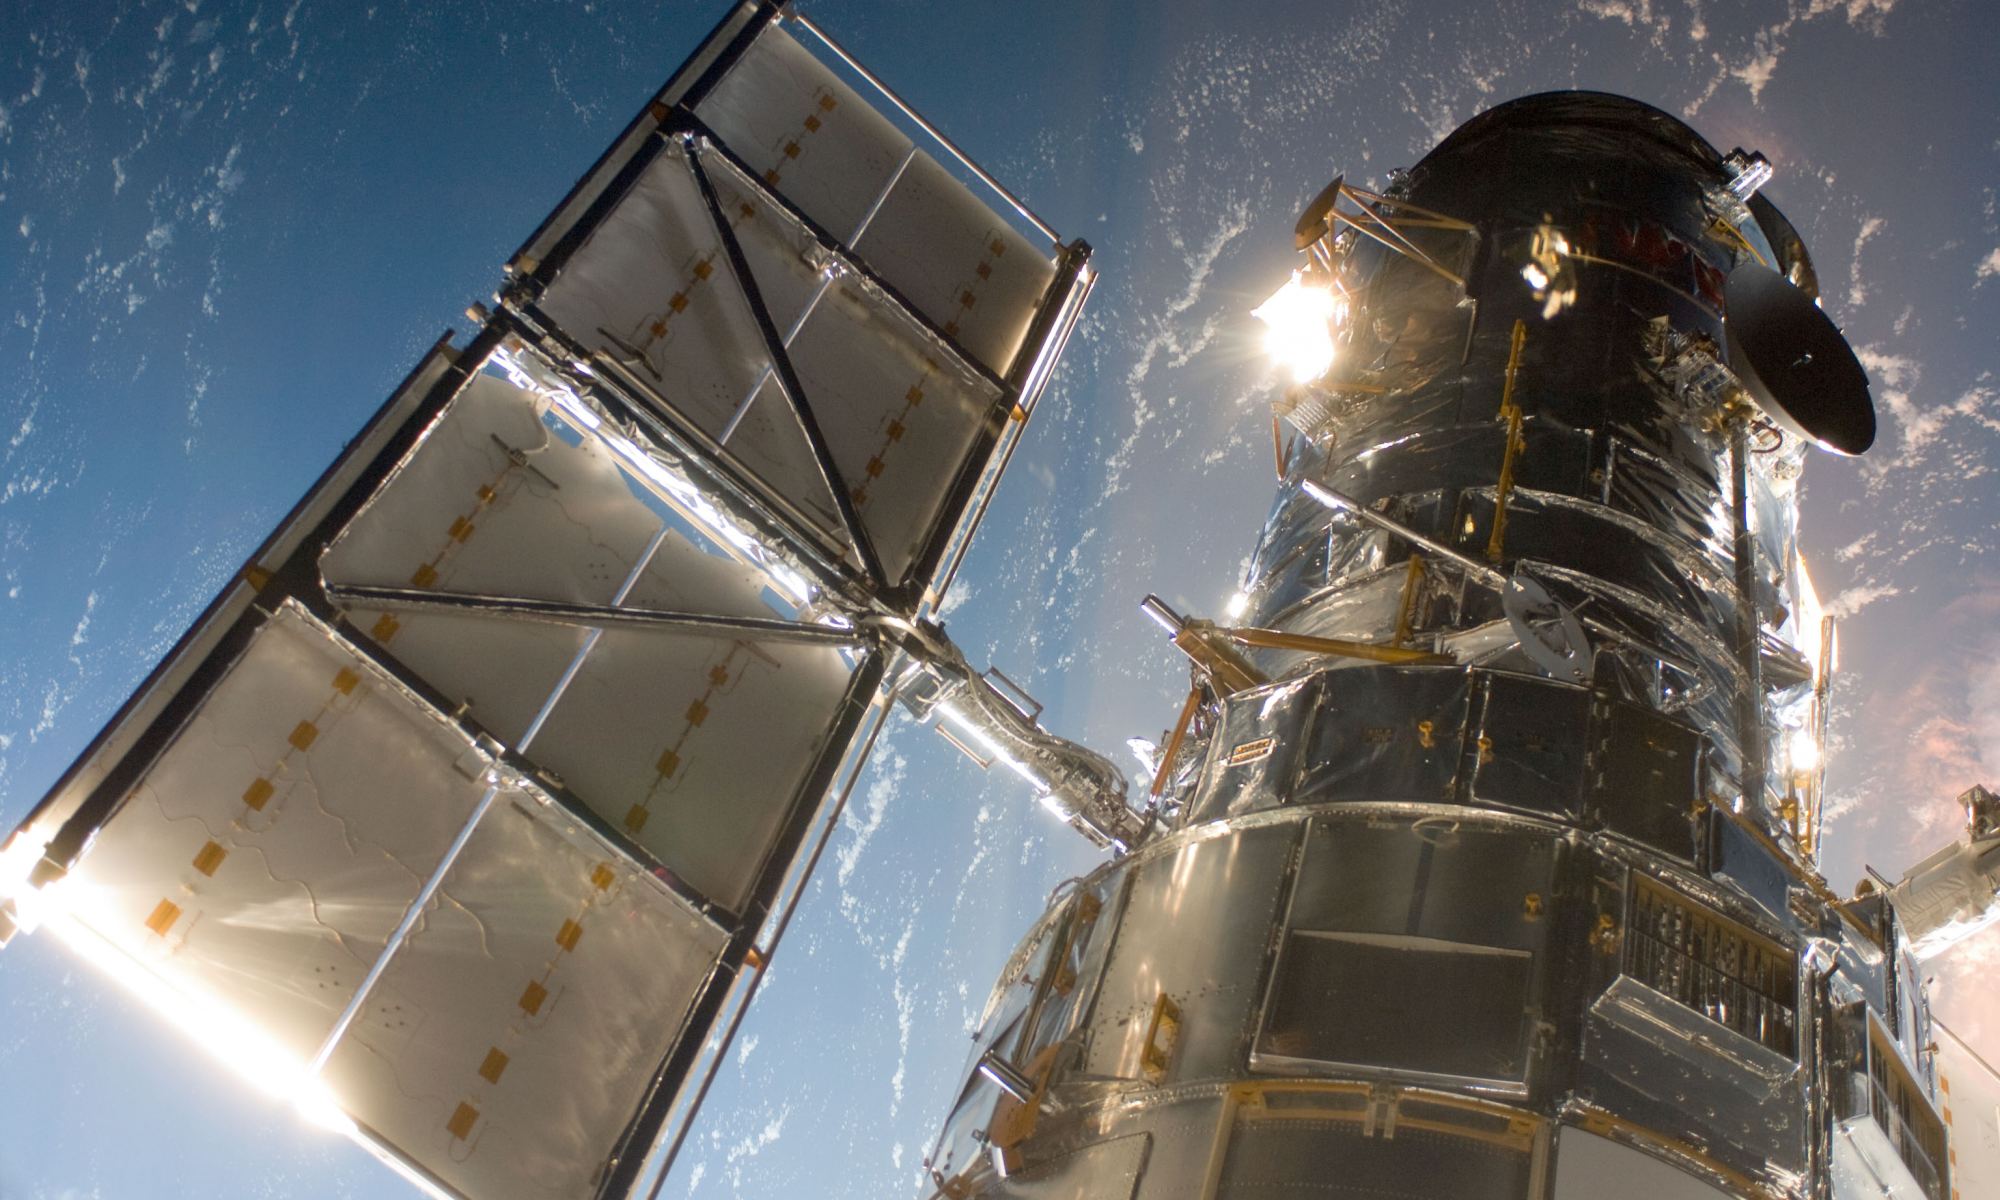 On January 8, 2019, the Wide Field Camera 3 on the Hubble Space Telescope suspended operations due to a hardware problem. Image Credit: NASA/STScI.